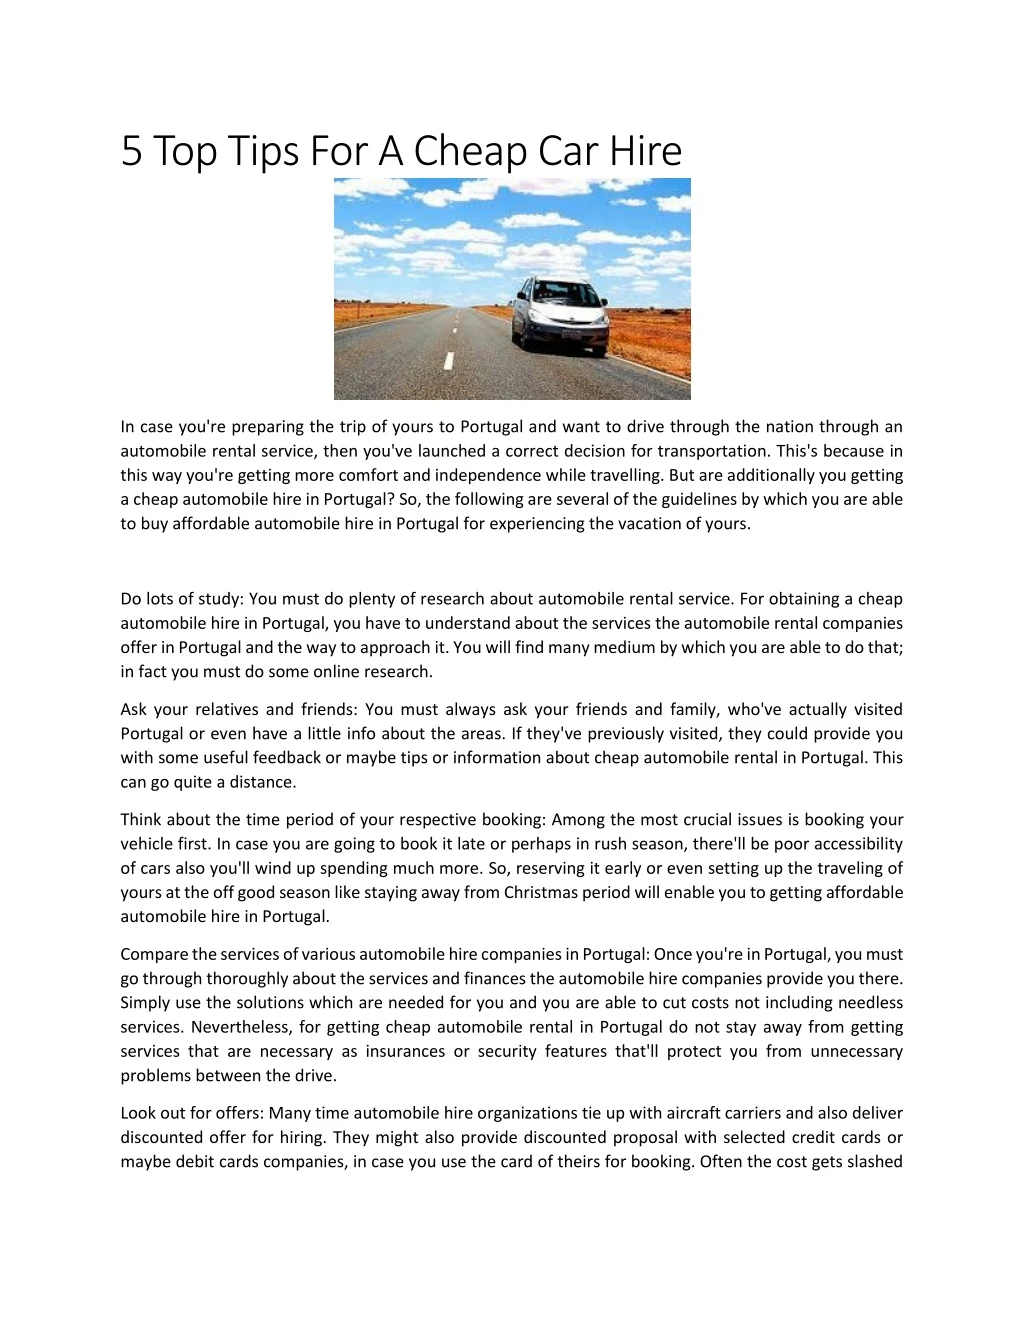 5 top tips for a cheap car hire